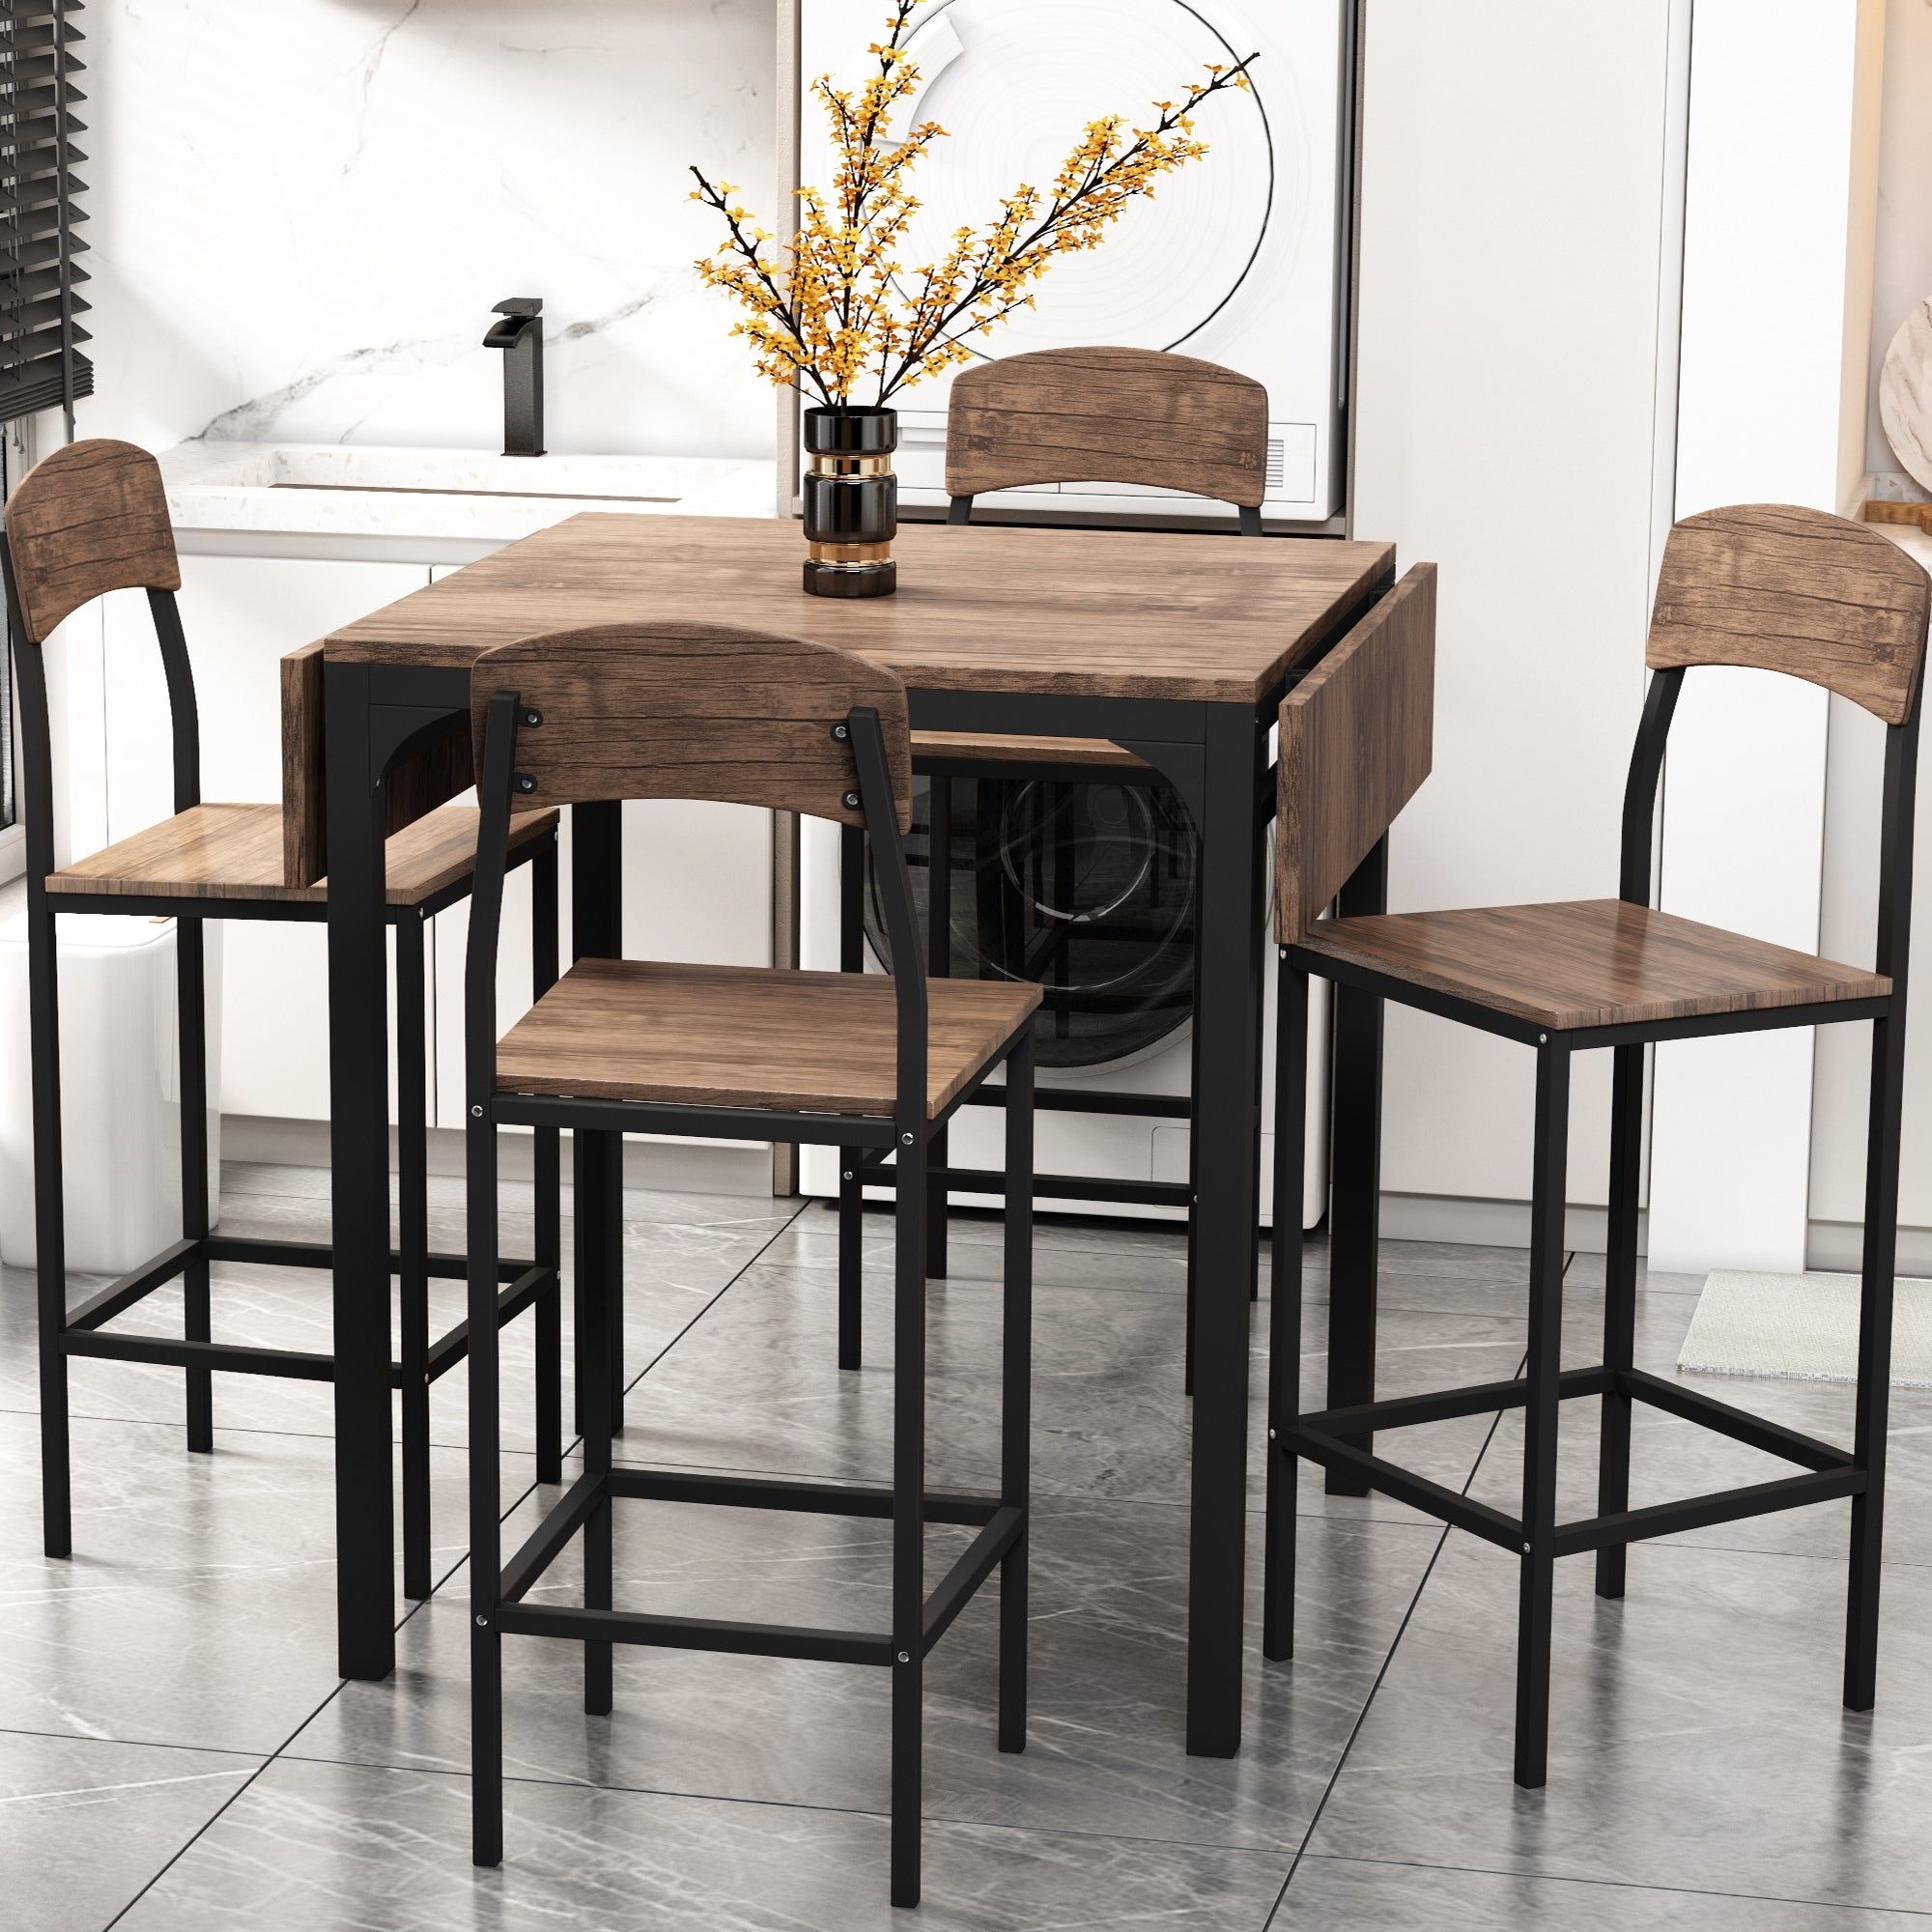 The Versatile Counter Height Drop Leaf Table: An Essential Piece for Small Spaces